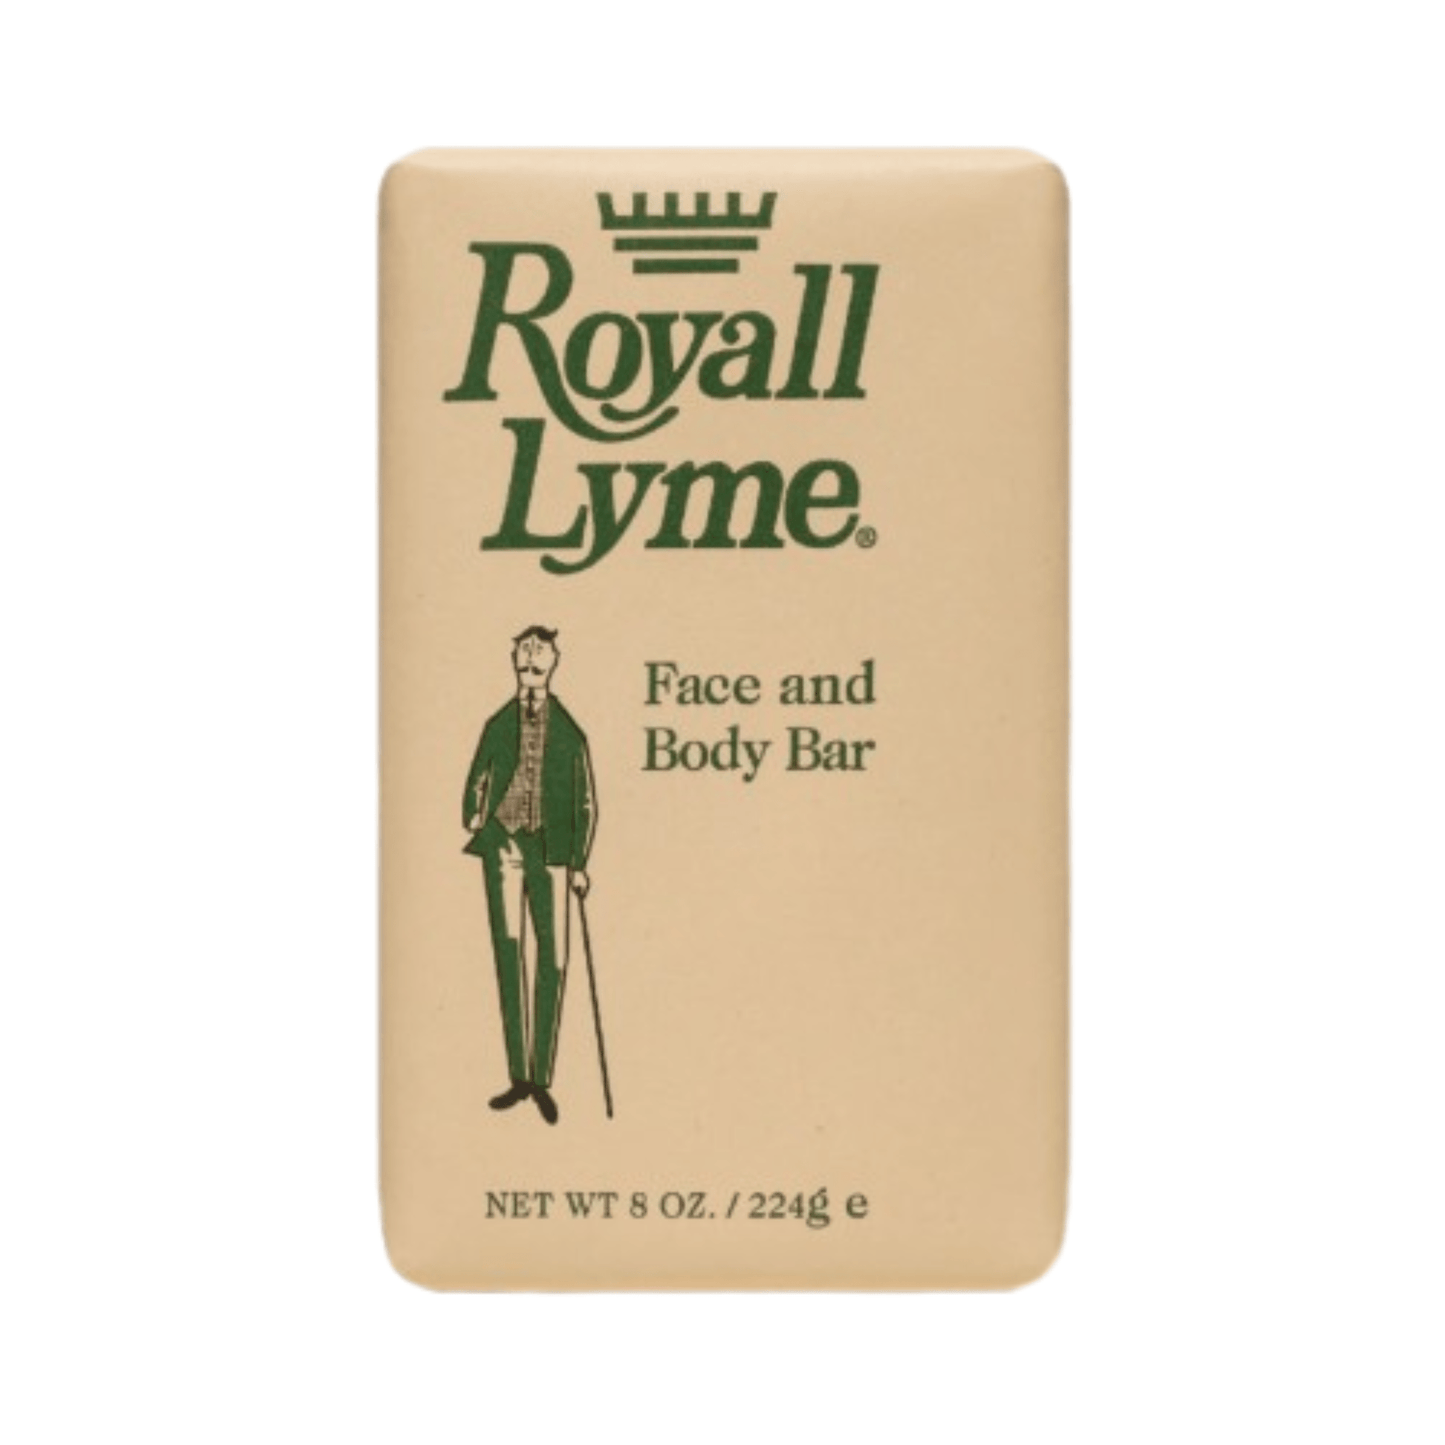 Primary Image of Royall Lyme Soap